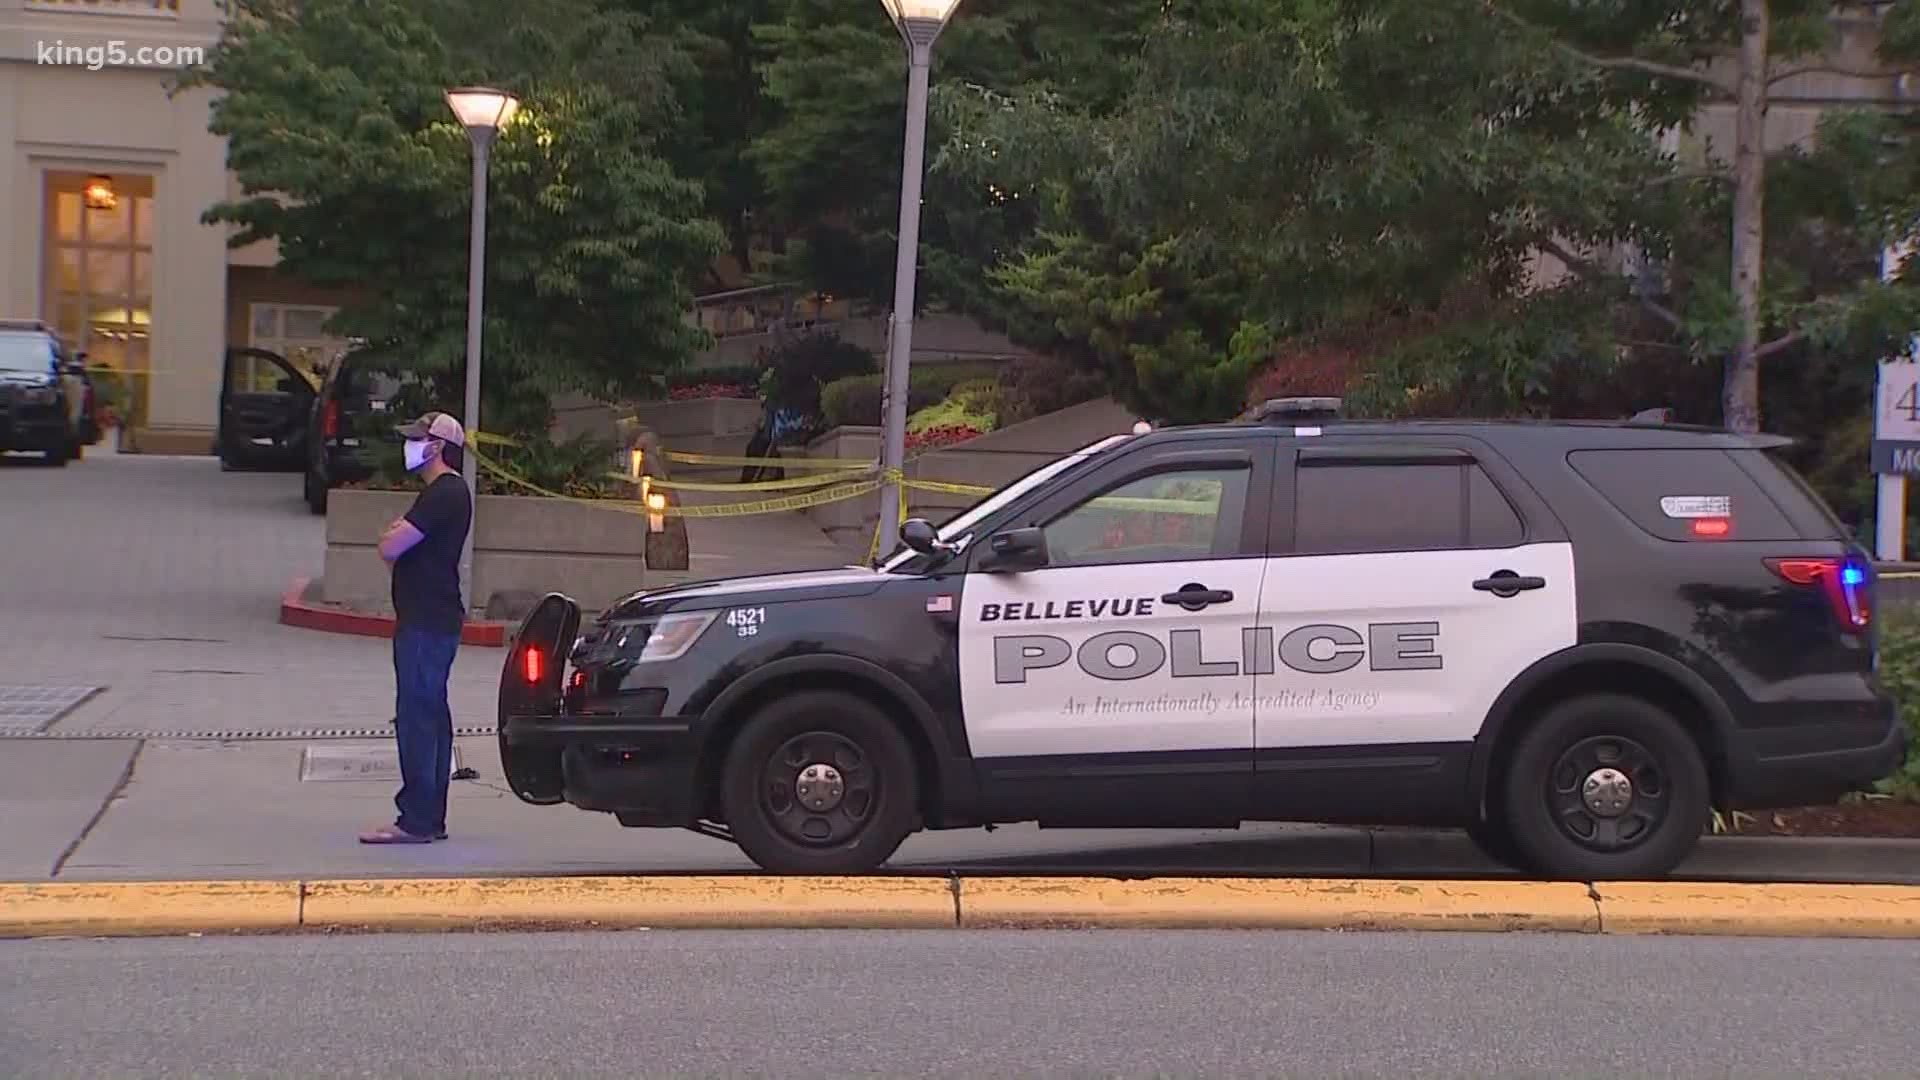 Two men are dead and another man is in critical condition after a violent altercation in Bellevue Saturday. A woman is also being treated for injuries.